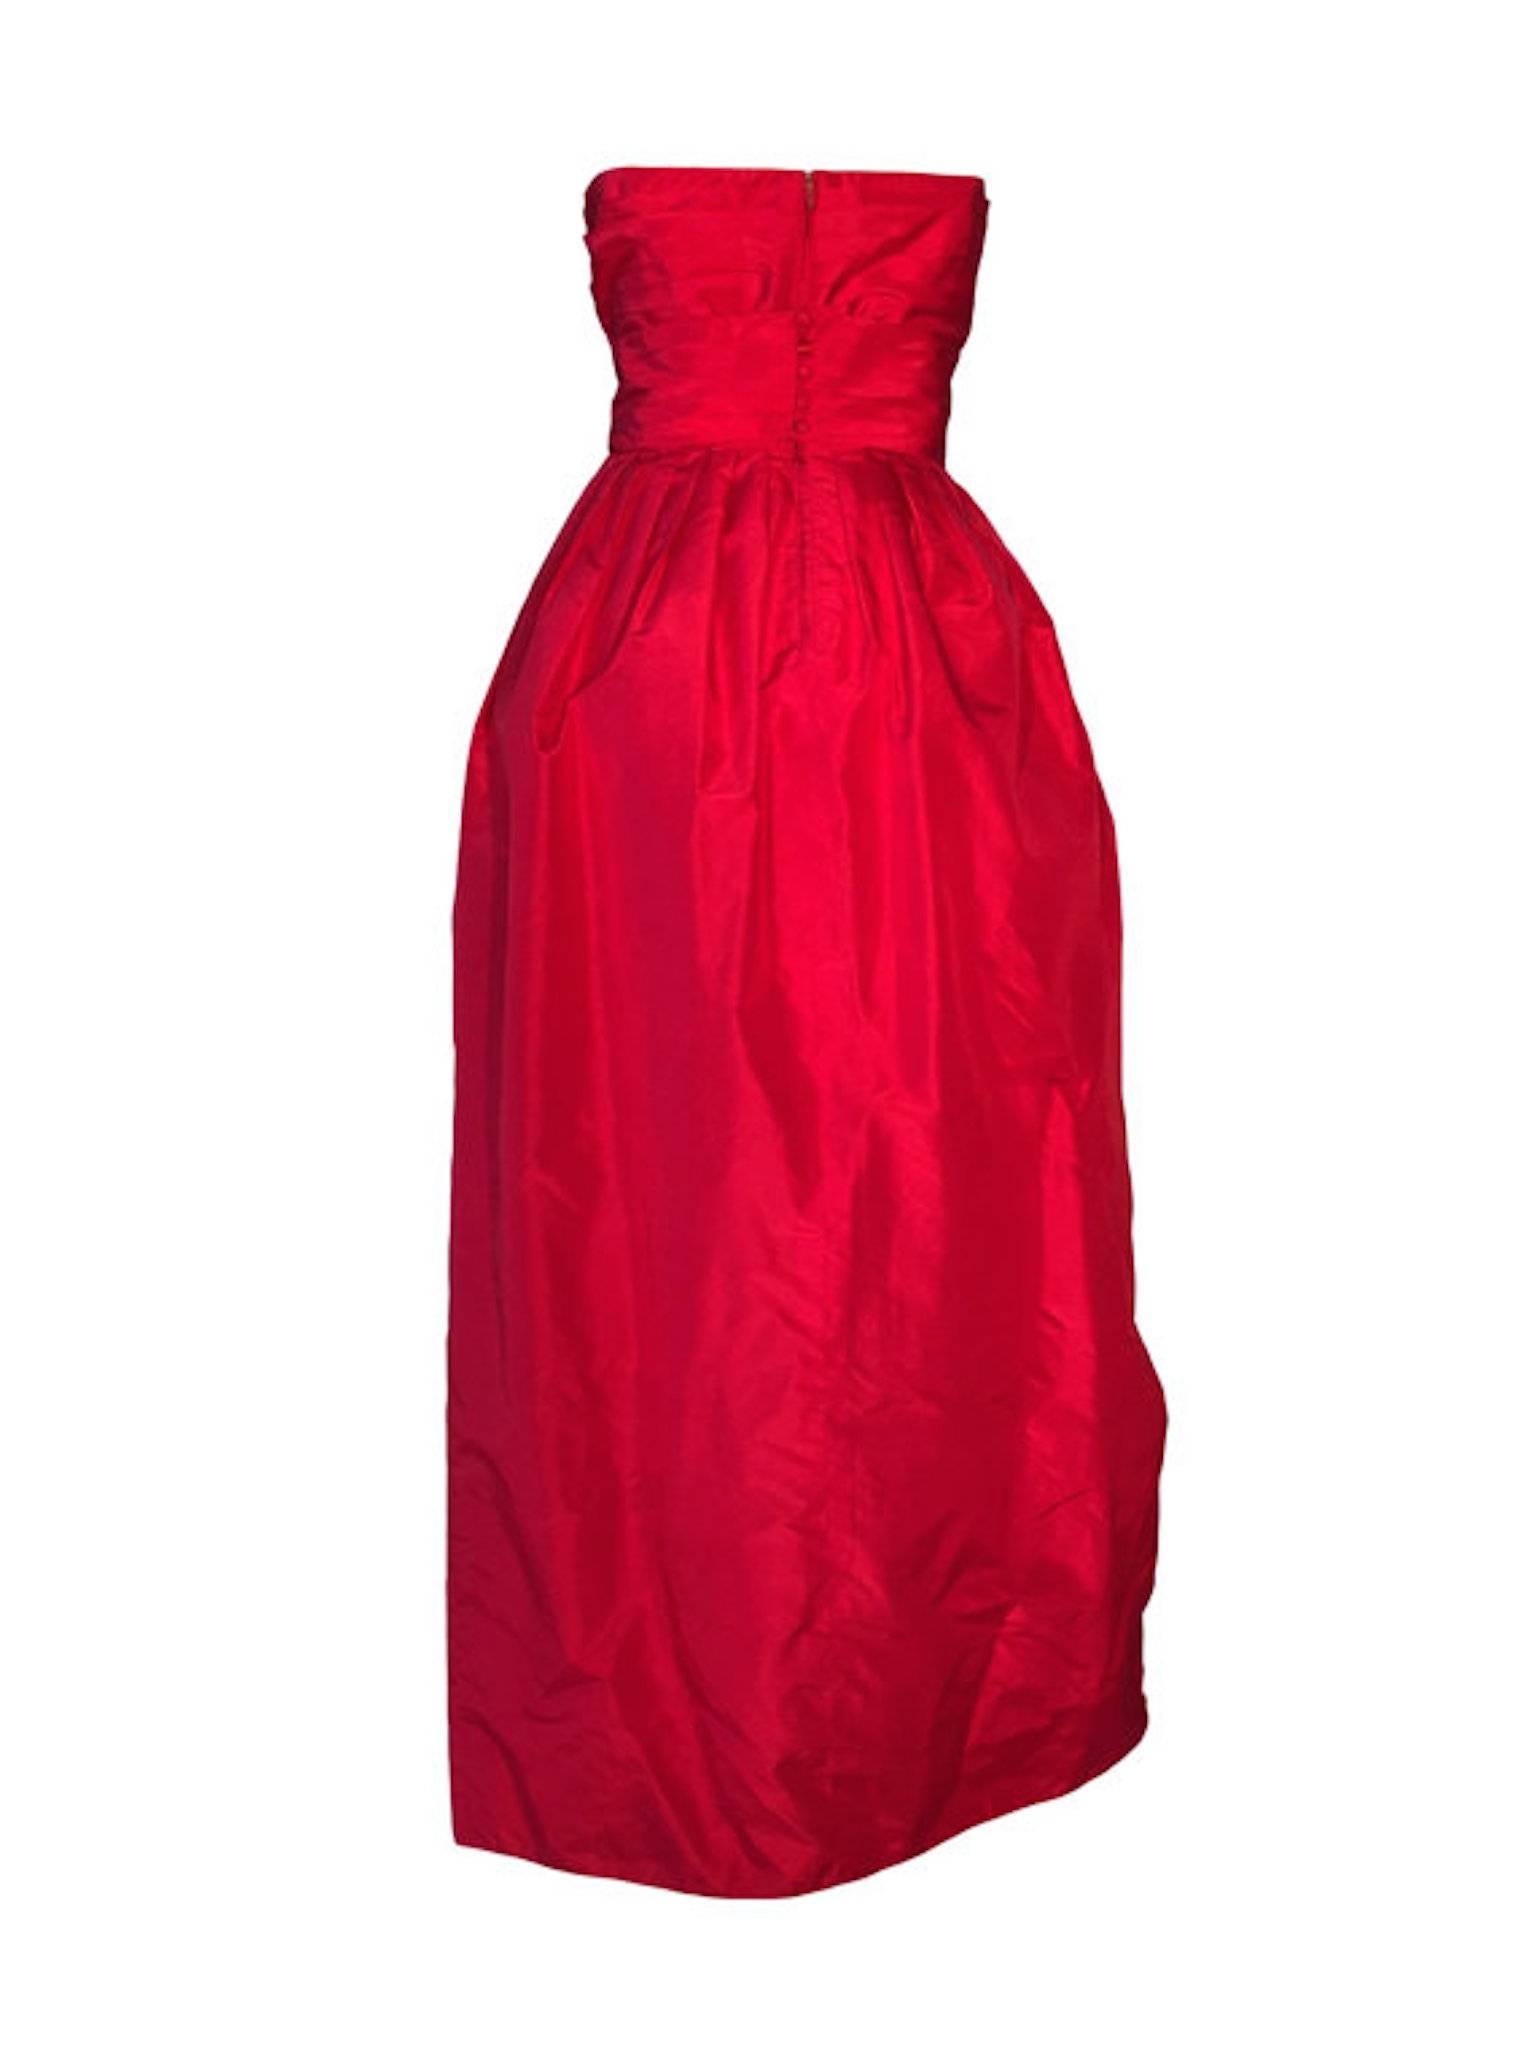 Vintage red taffeta Estevez boned bustier cocktail/evening dress. Lined with chiffon, has button back belt and zip, tulip shaped skirt and fitted waist band.

Size UK 10/12 measuring 18.5 inches across bust, 14.5 inches across waist and 51 inches